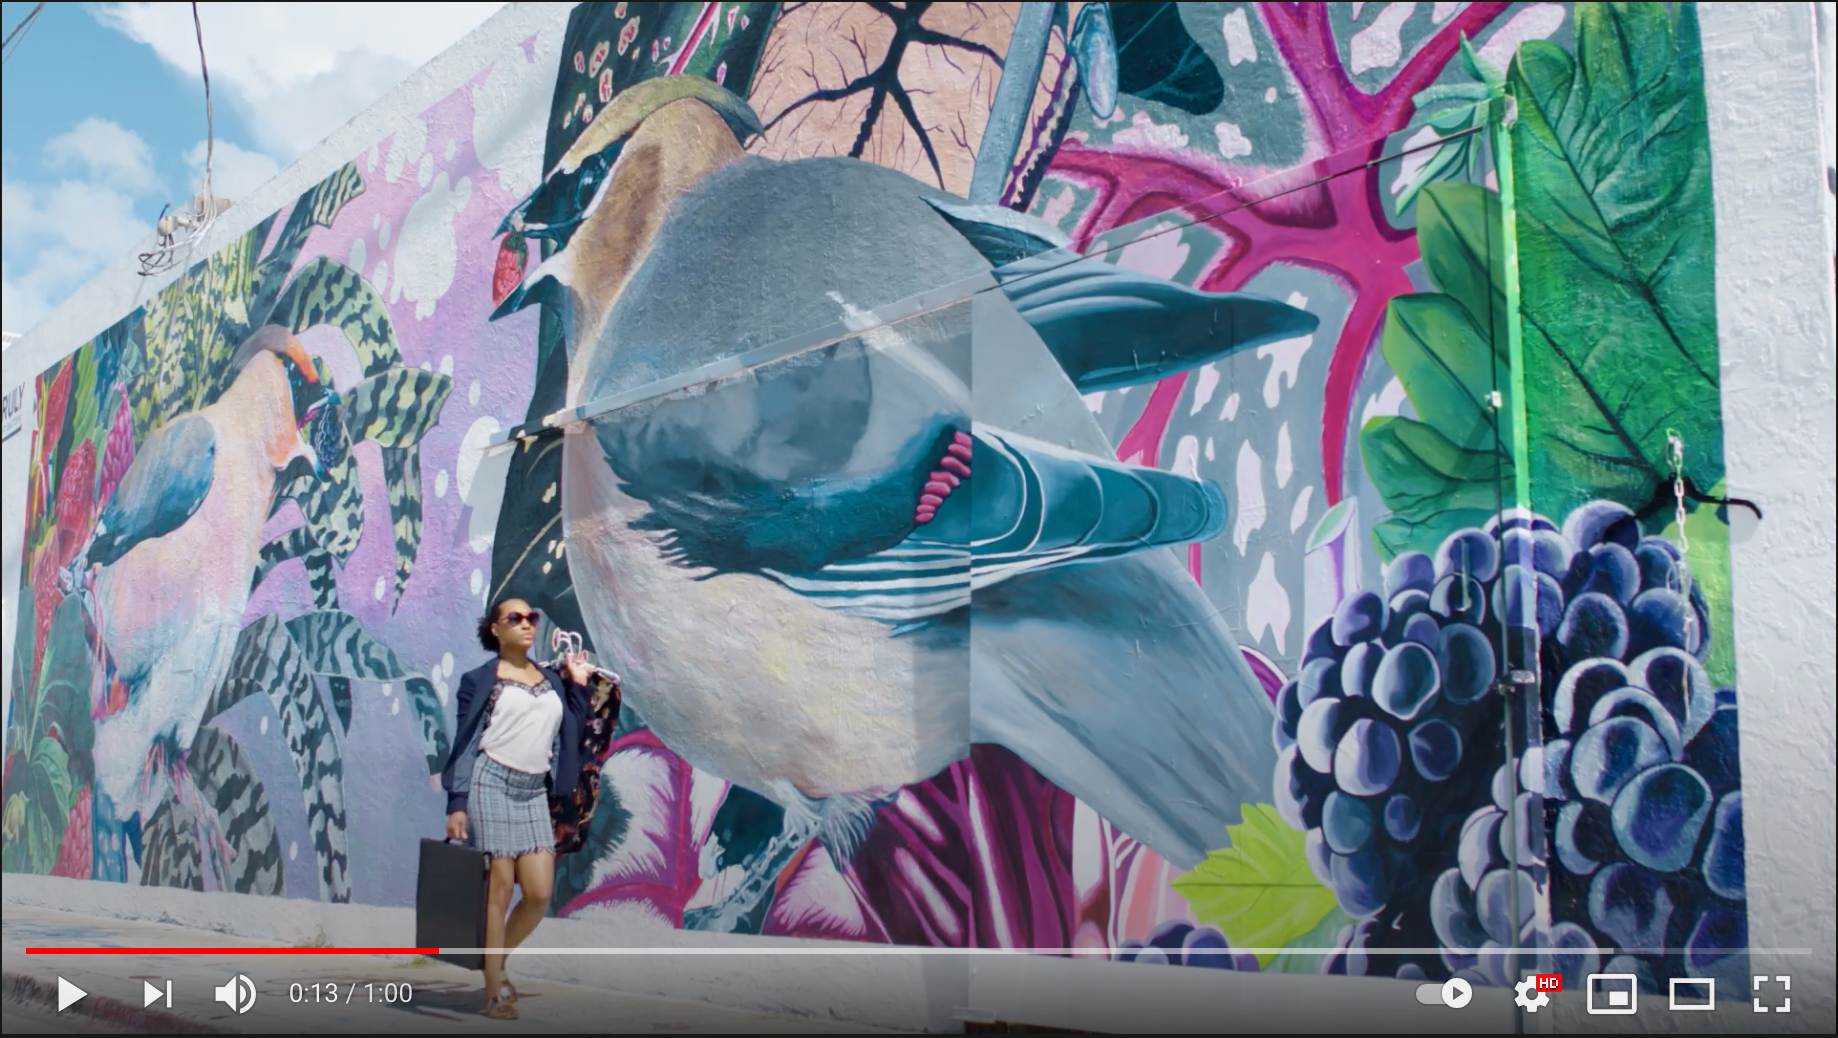 youtube video screen grab of a woman walking in front of a mural